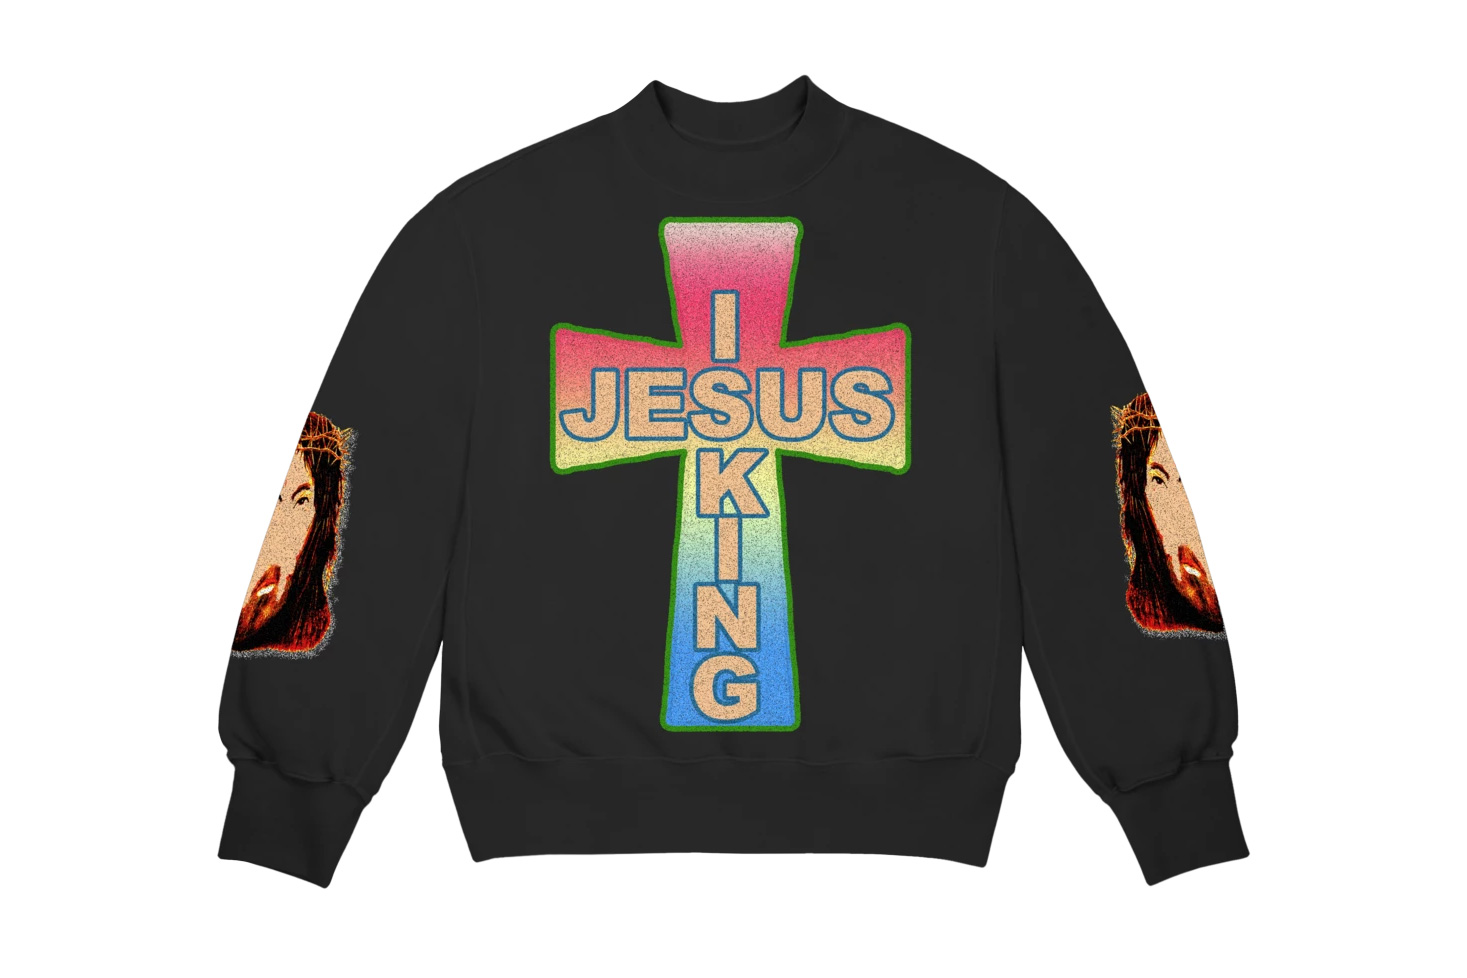 AWGE for Kanye West 'Jesus Is King' Merch Price | Drops | Hypebeast